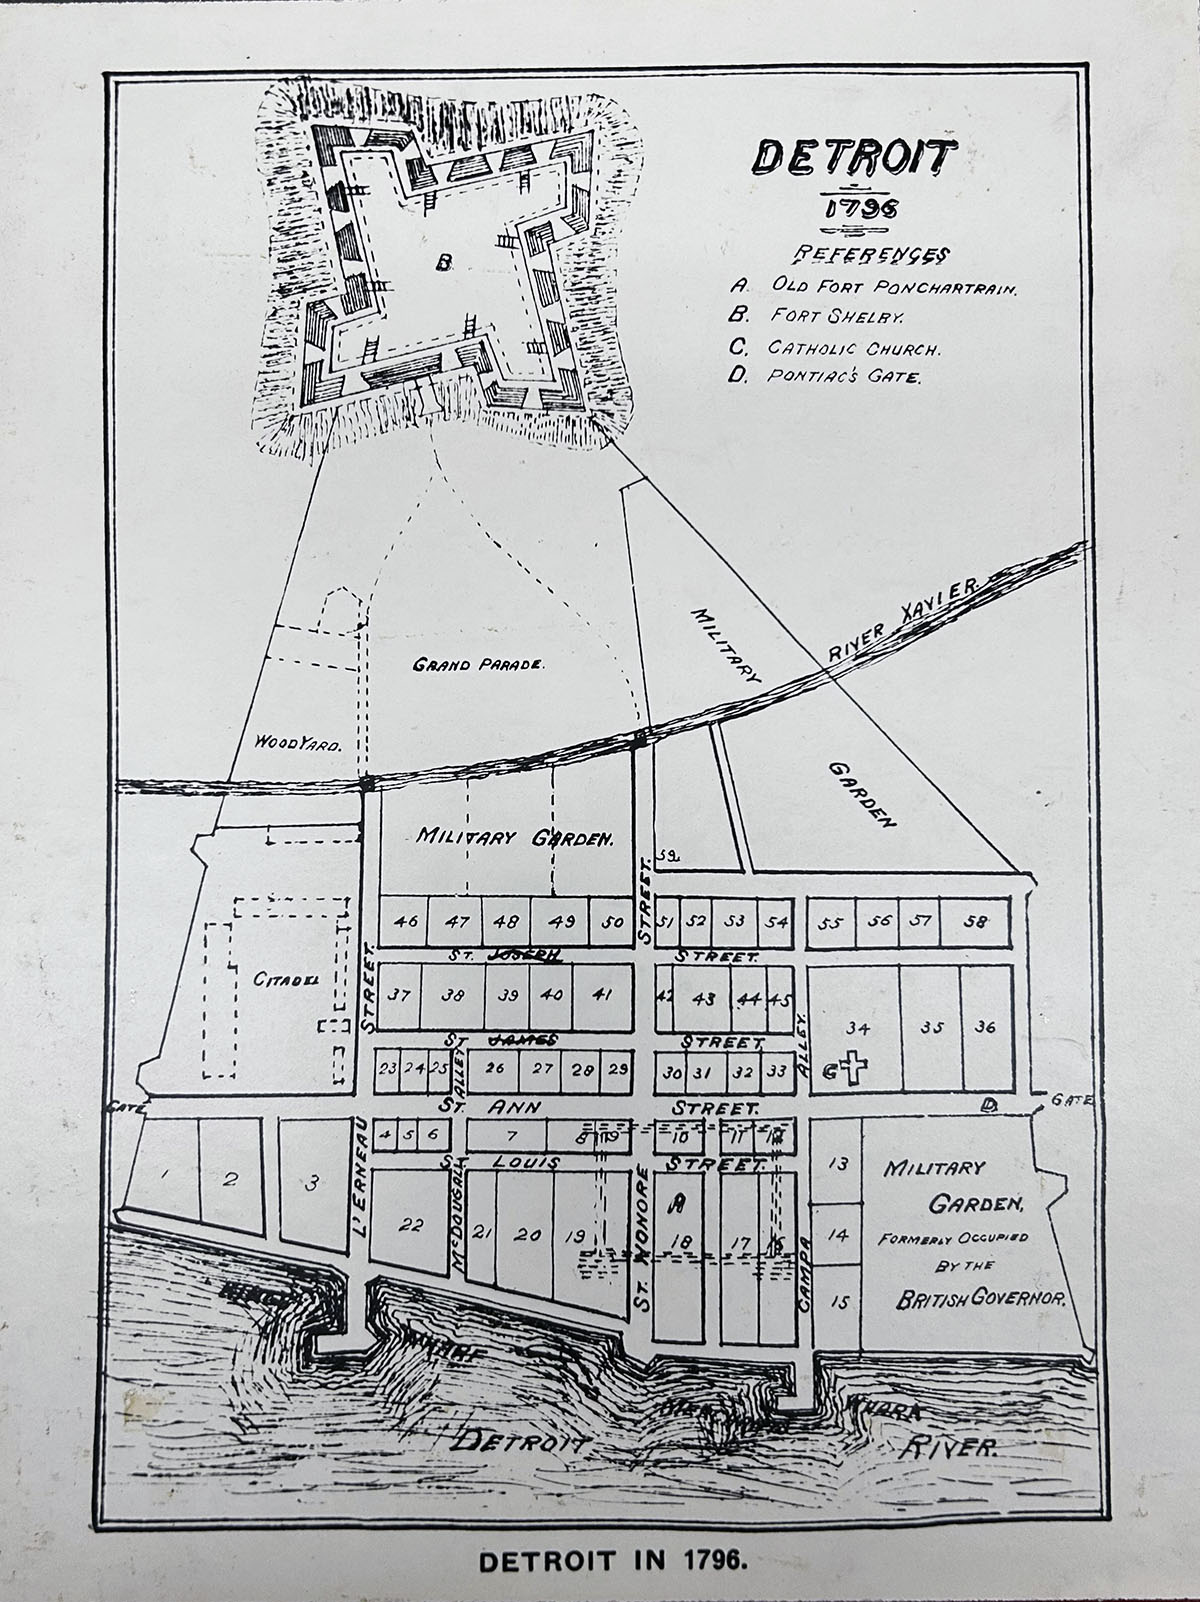 A map of Detroit as it was drawn in 1796.